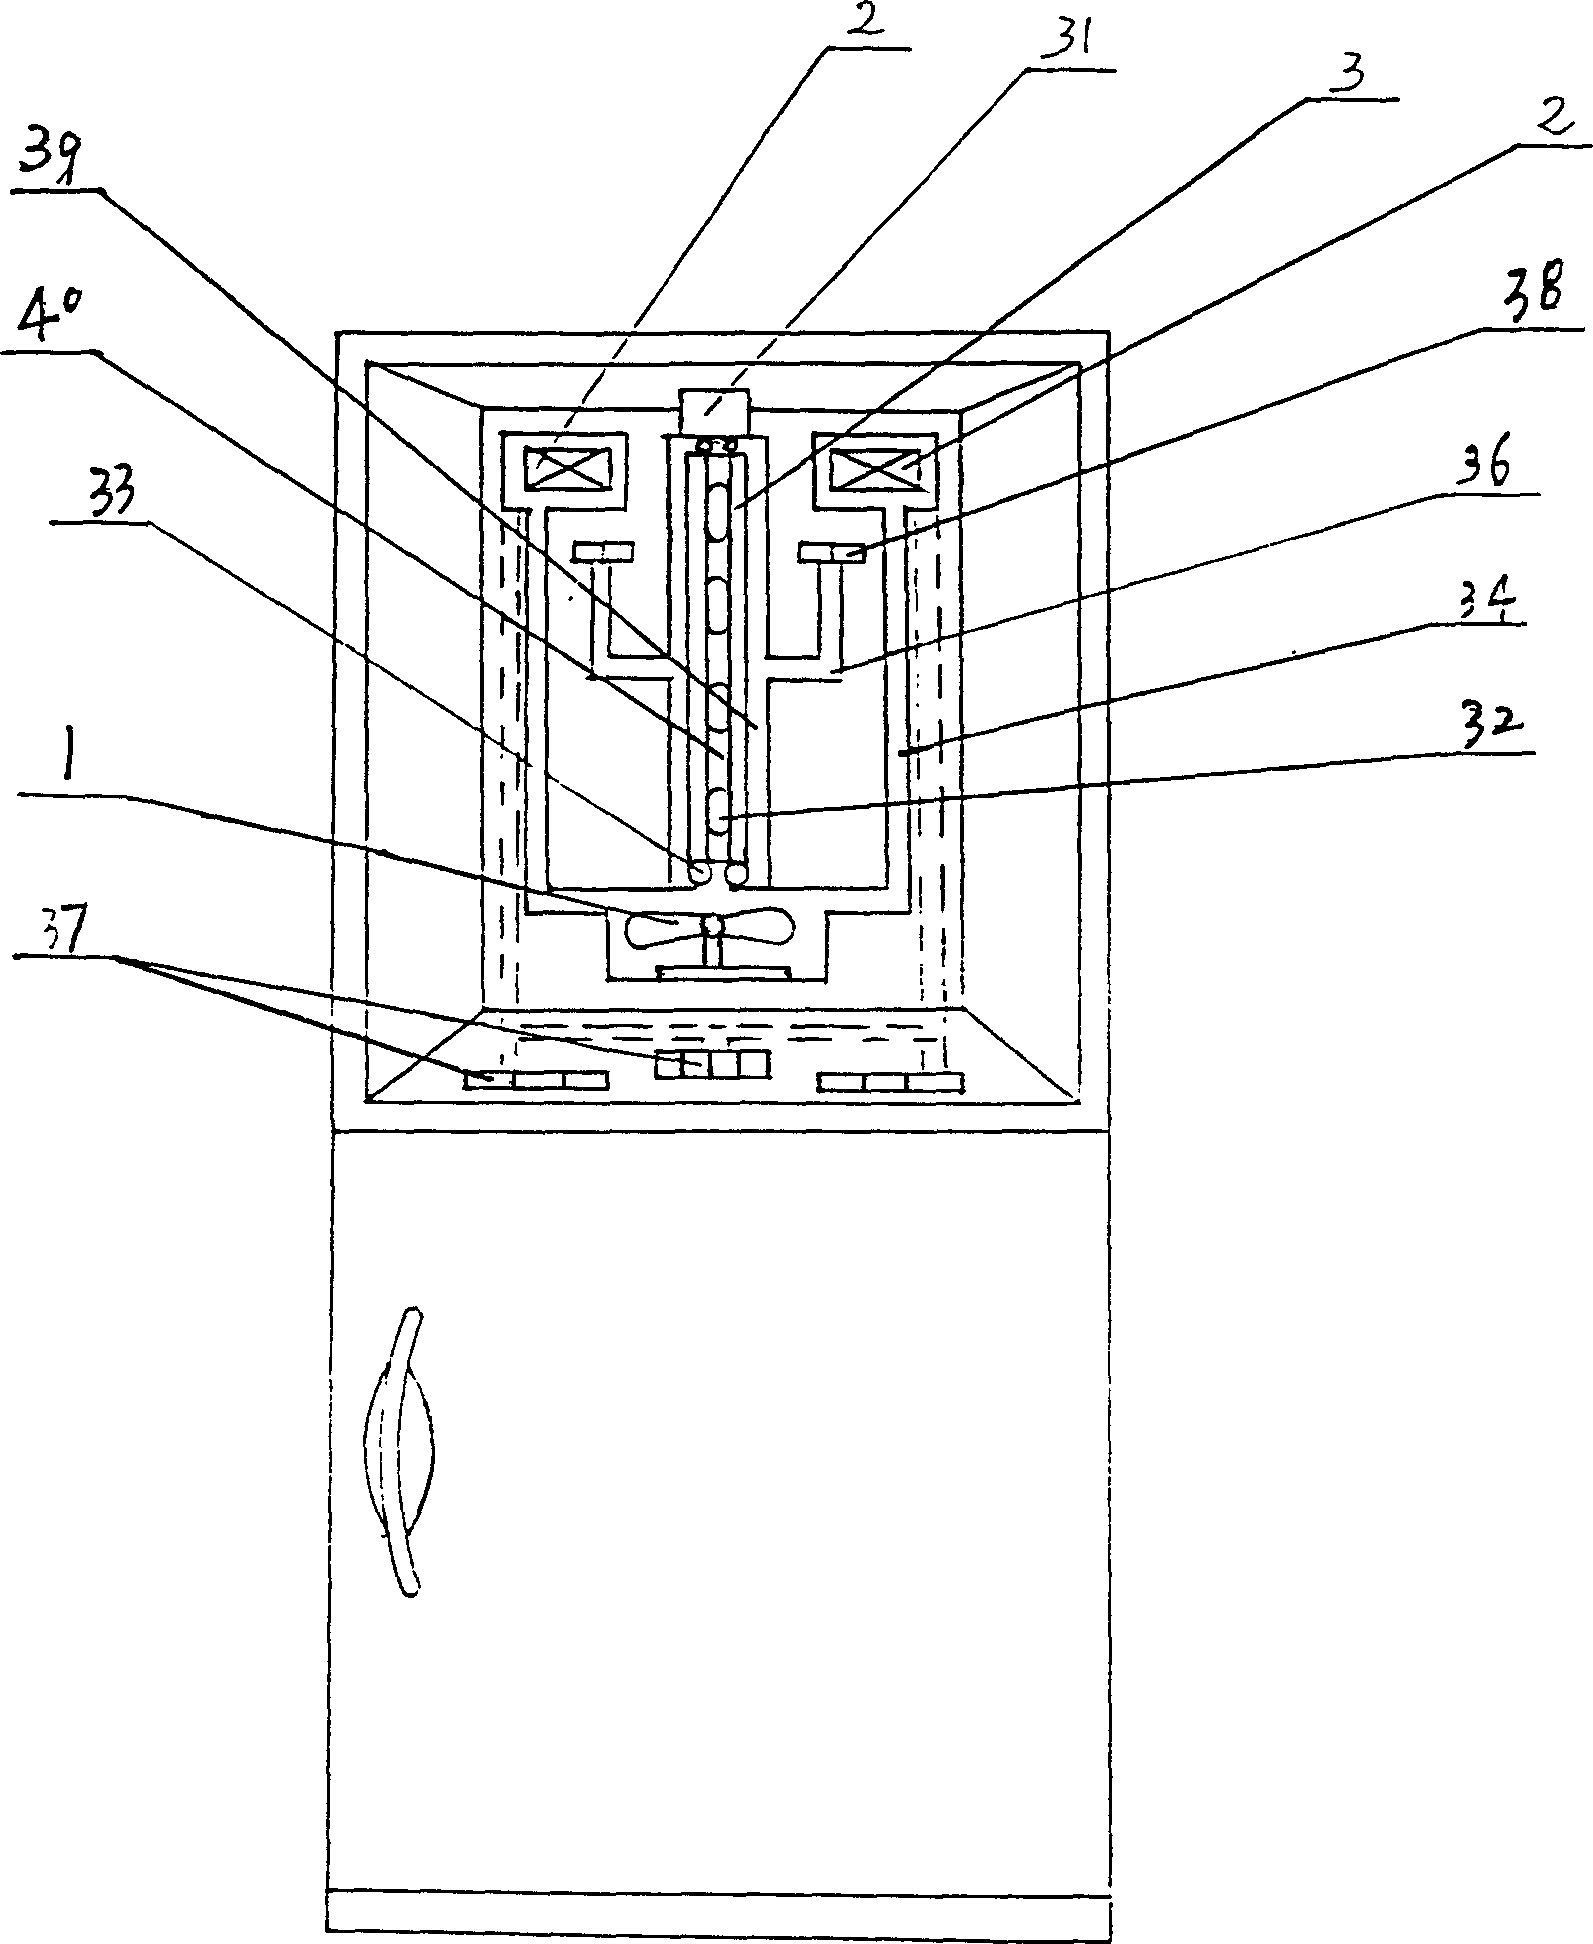 Blower cooling system for blower cooled refrigerator